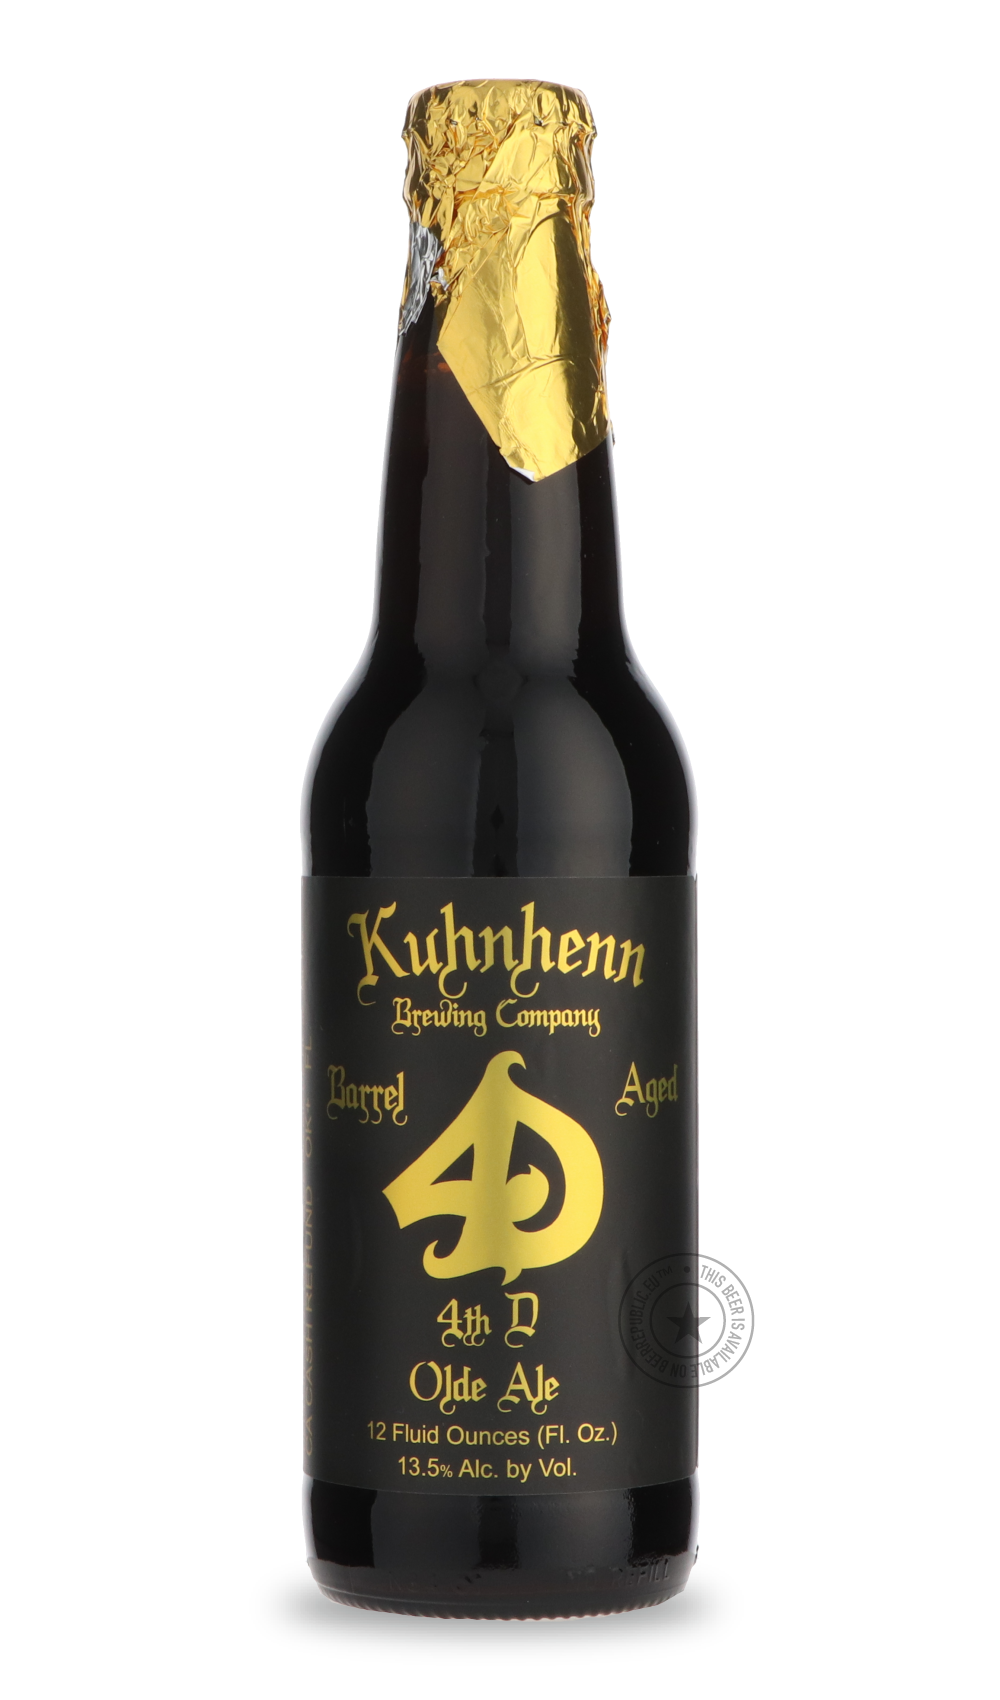 -Kuhnhenn- Bourbon Barrel Fourth Dementia Olde Ale-Brown & Dark- Only @ Beer Republic - The best online beer store for American & Canadian craft beer - Buy beer online from the USA and Canada - Bier online kopen - Amerikaans bier kopen - Craft beer store - Craft beer kopen - Amerikanisch bier kaufen - Bier online kaufen - Acheter biere online - IPA - Stout - Porter - New England IPA - Hazy IPA - Imperial Stout - Barrel Aged - Barrel Aged Imperial Stout - Brown - Dark beer - Blond - Blonde - Pilsner - Lager 